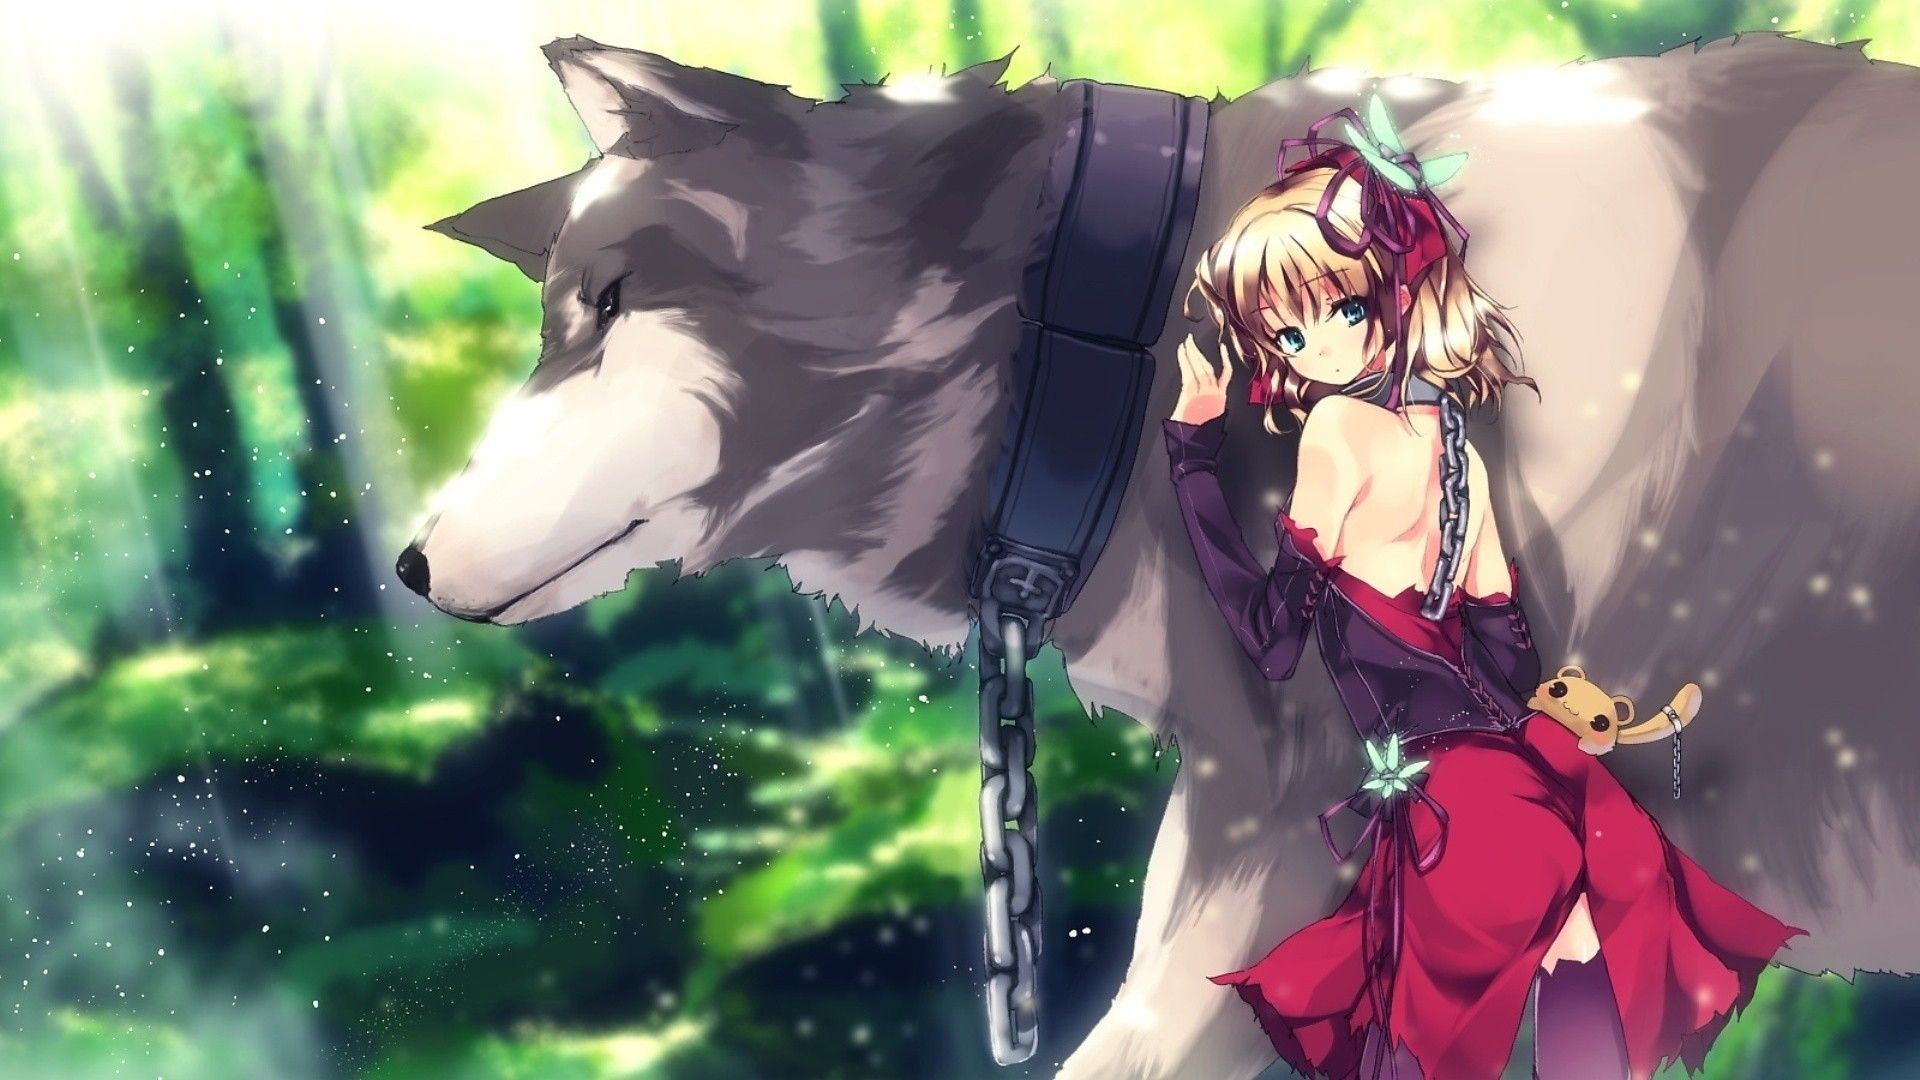 wolf anime girl - Wallpaper Cave